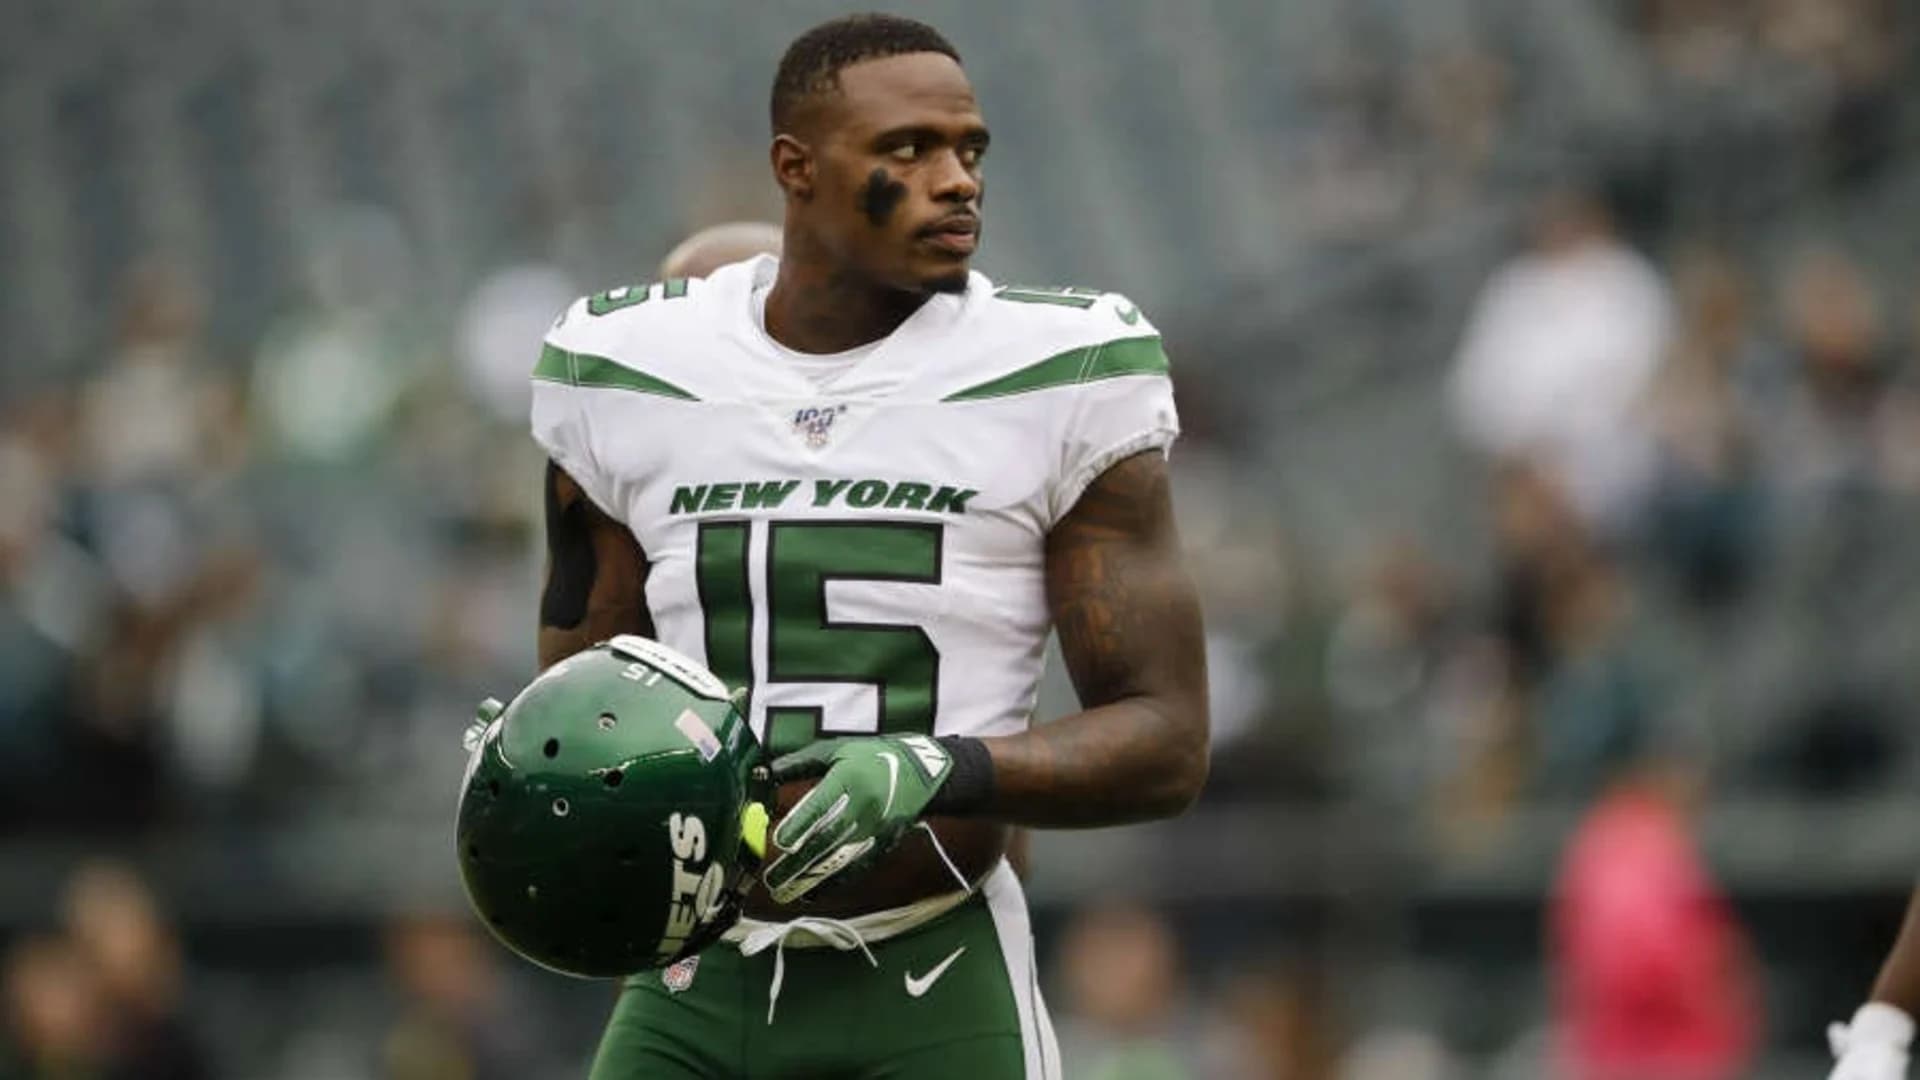 DOJ: Ex-Jets WR charged in $24M scheme to obtain COVID-19 relief funds